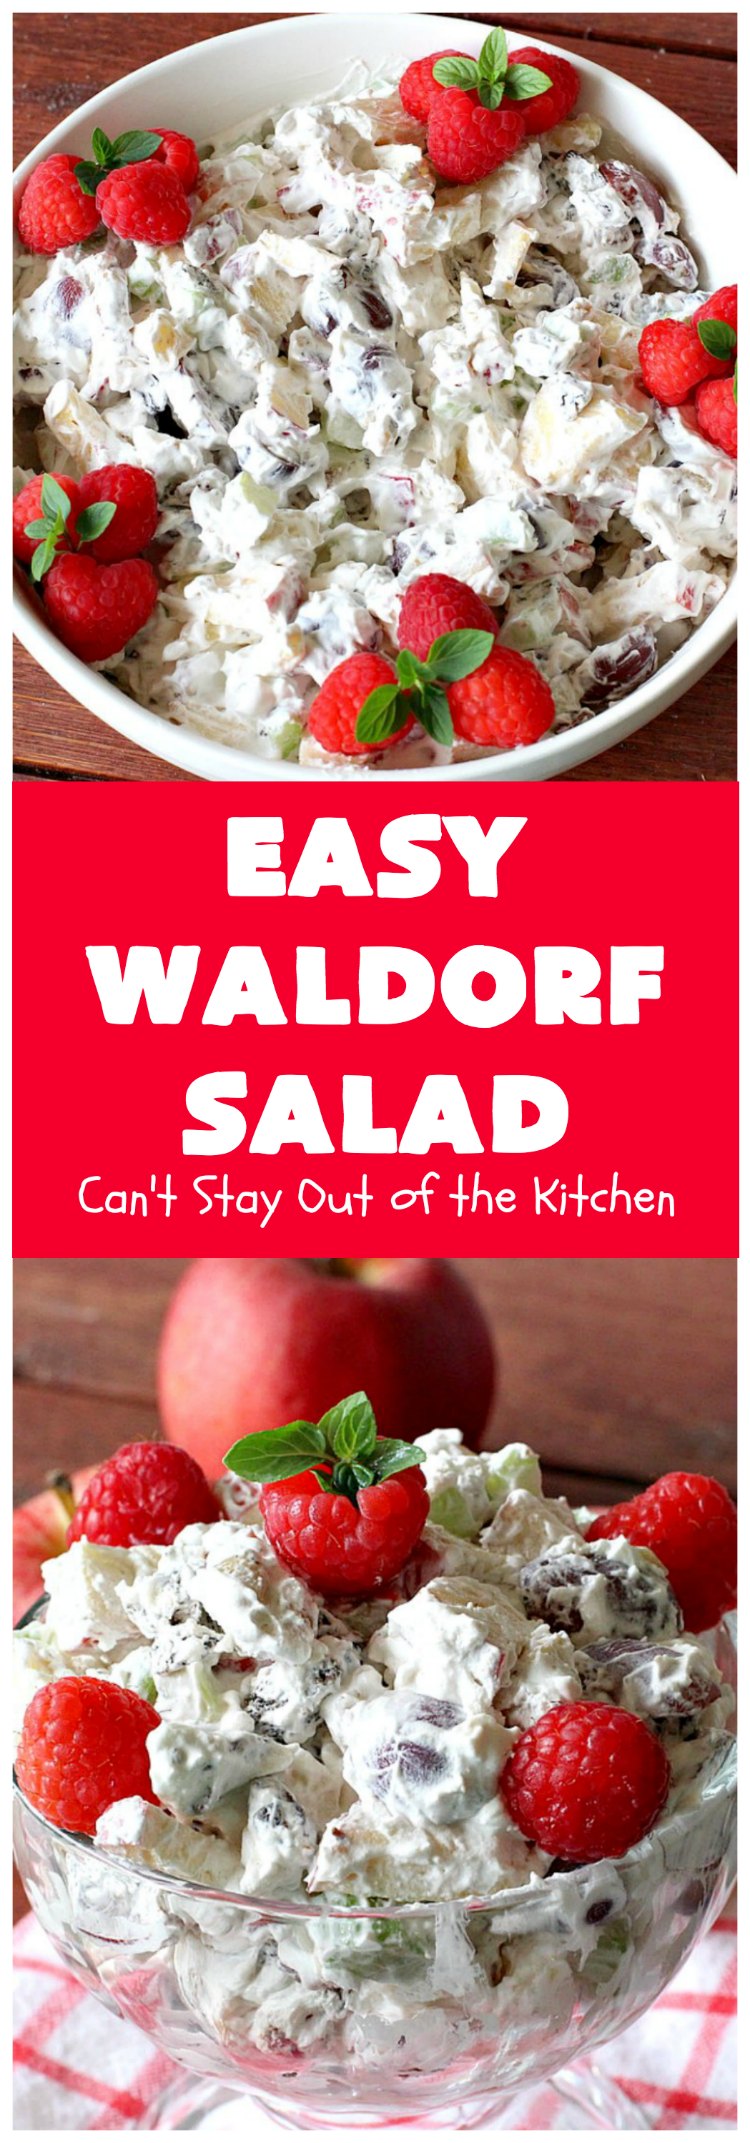 Easy Waldorf Salad | Can't Stay Out of the Kitchen